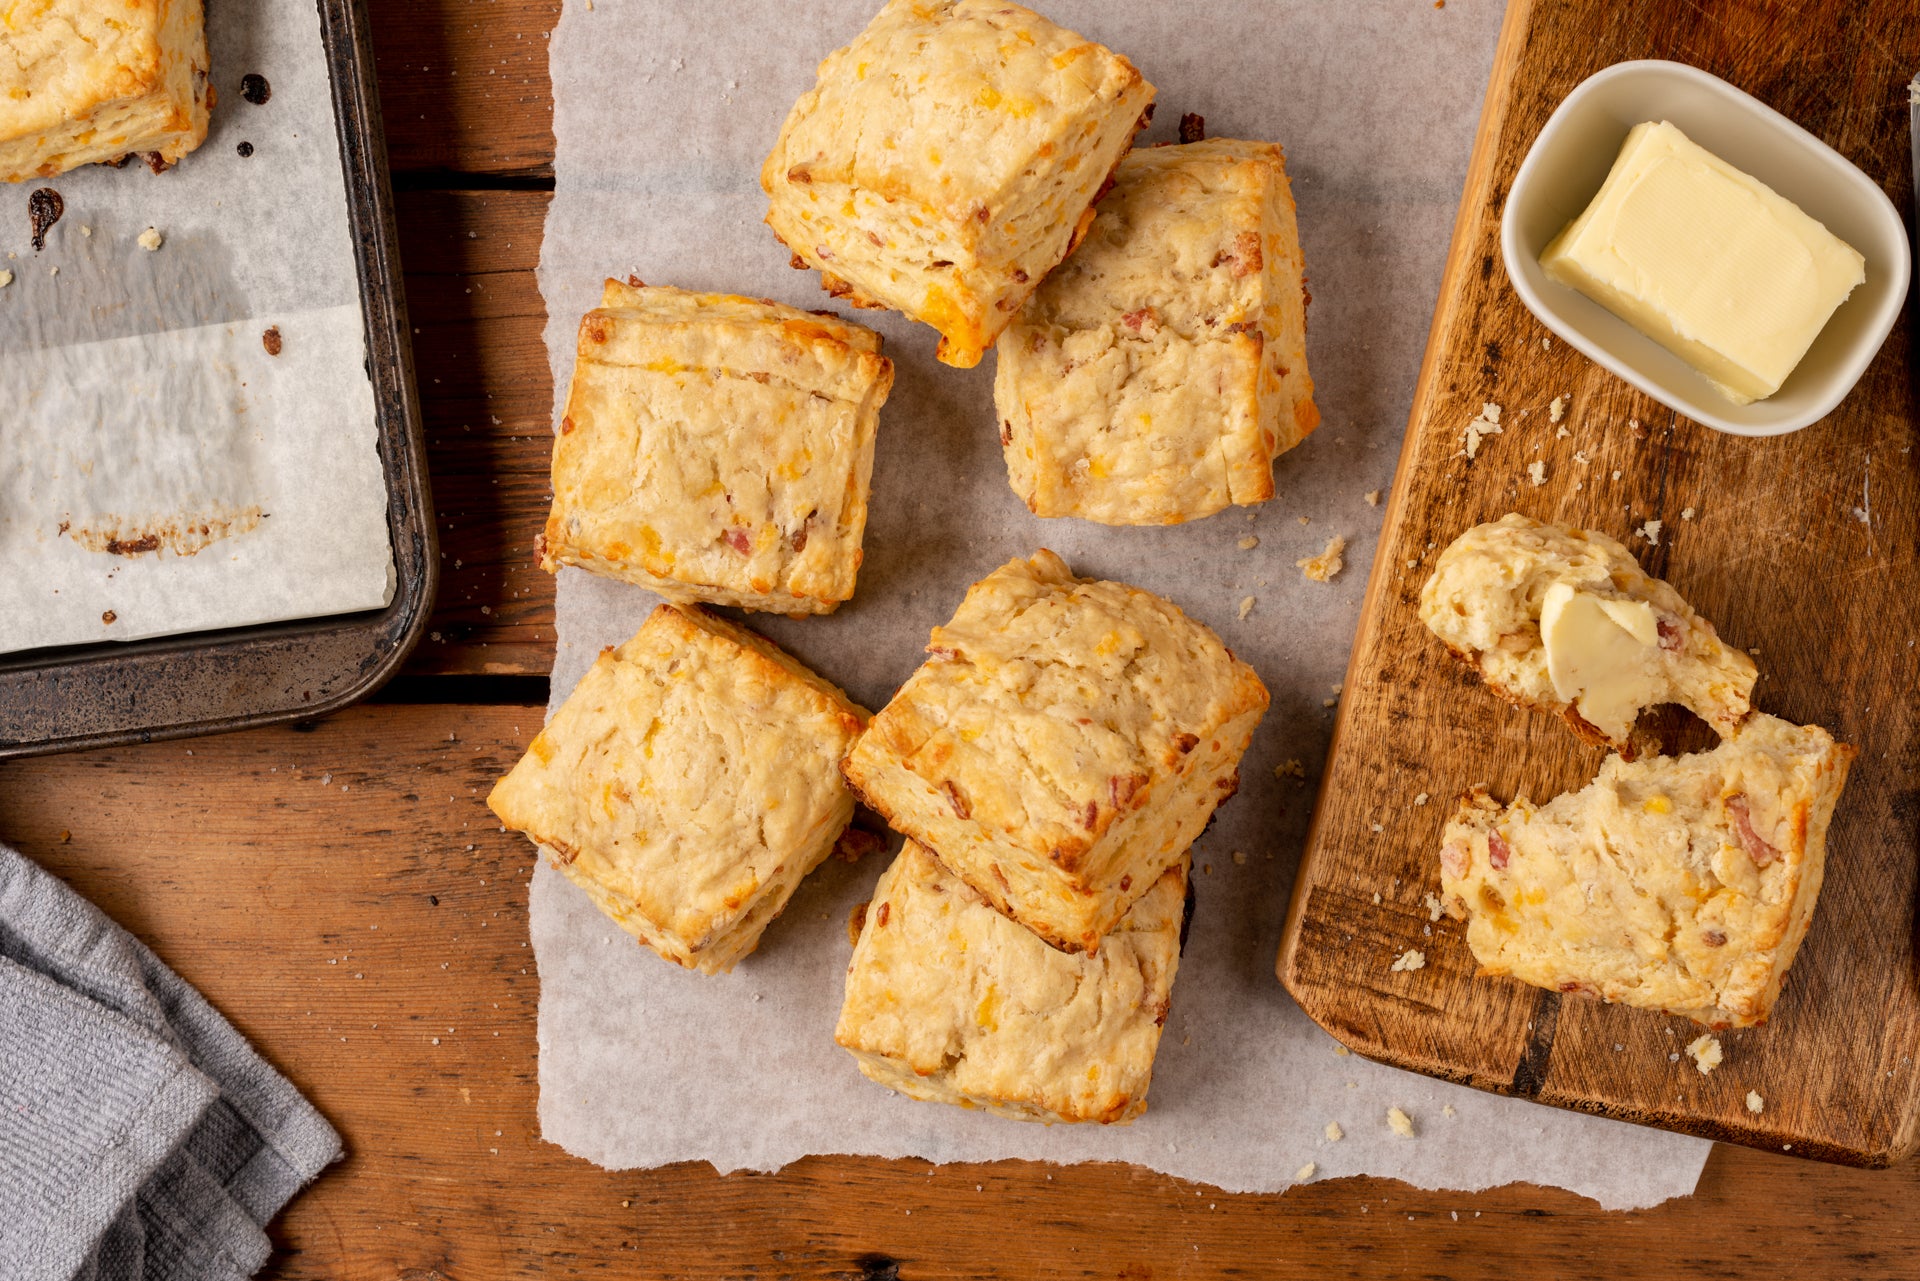 Bacon & Buttermilk Biscuits using Wabanaki Maple Syrup 